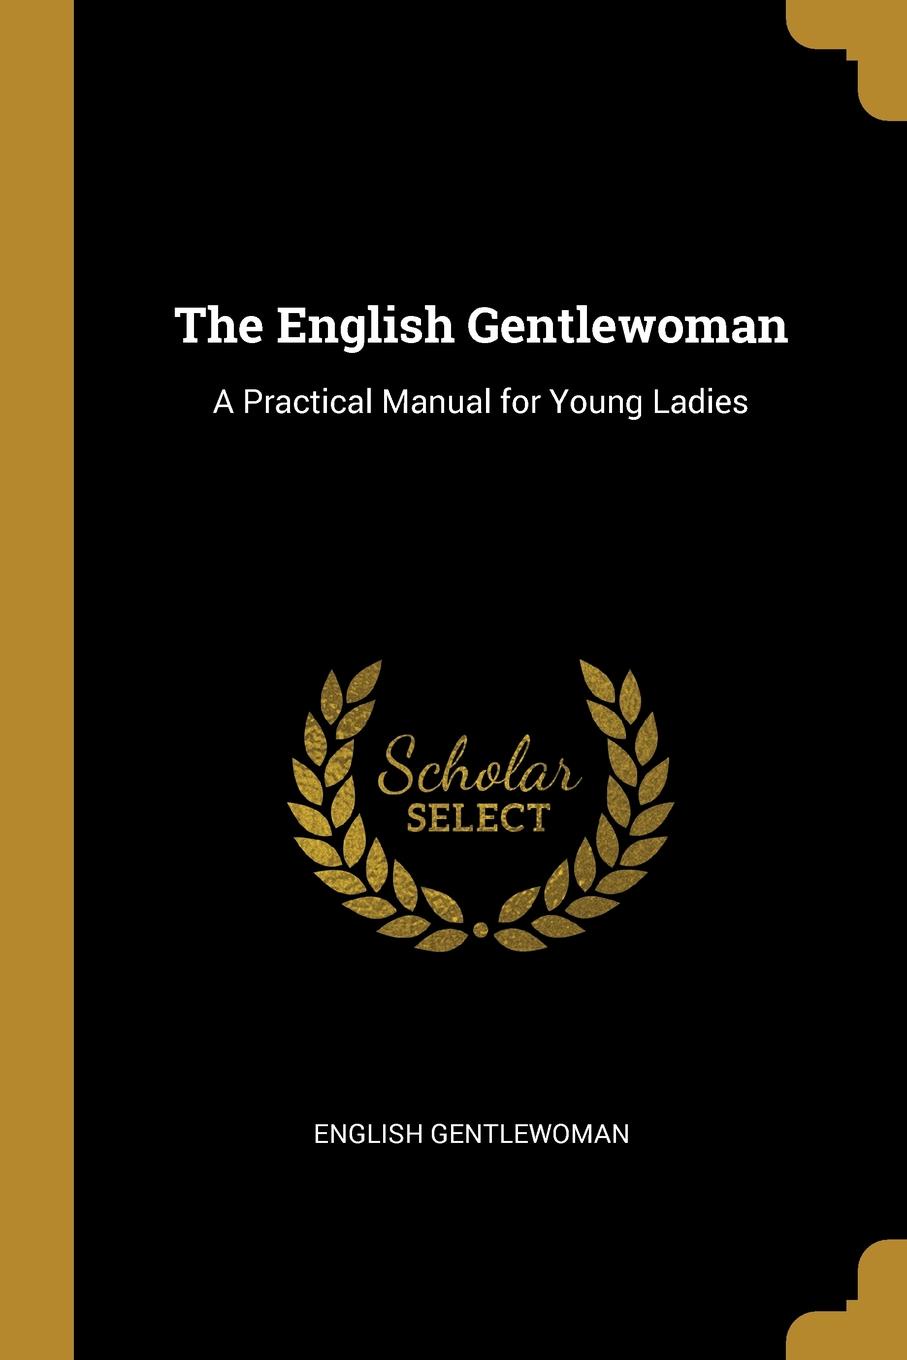 The English Gentlewoman. A Practical Manual for Young Ladies